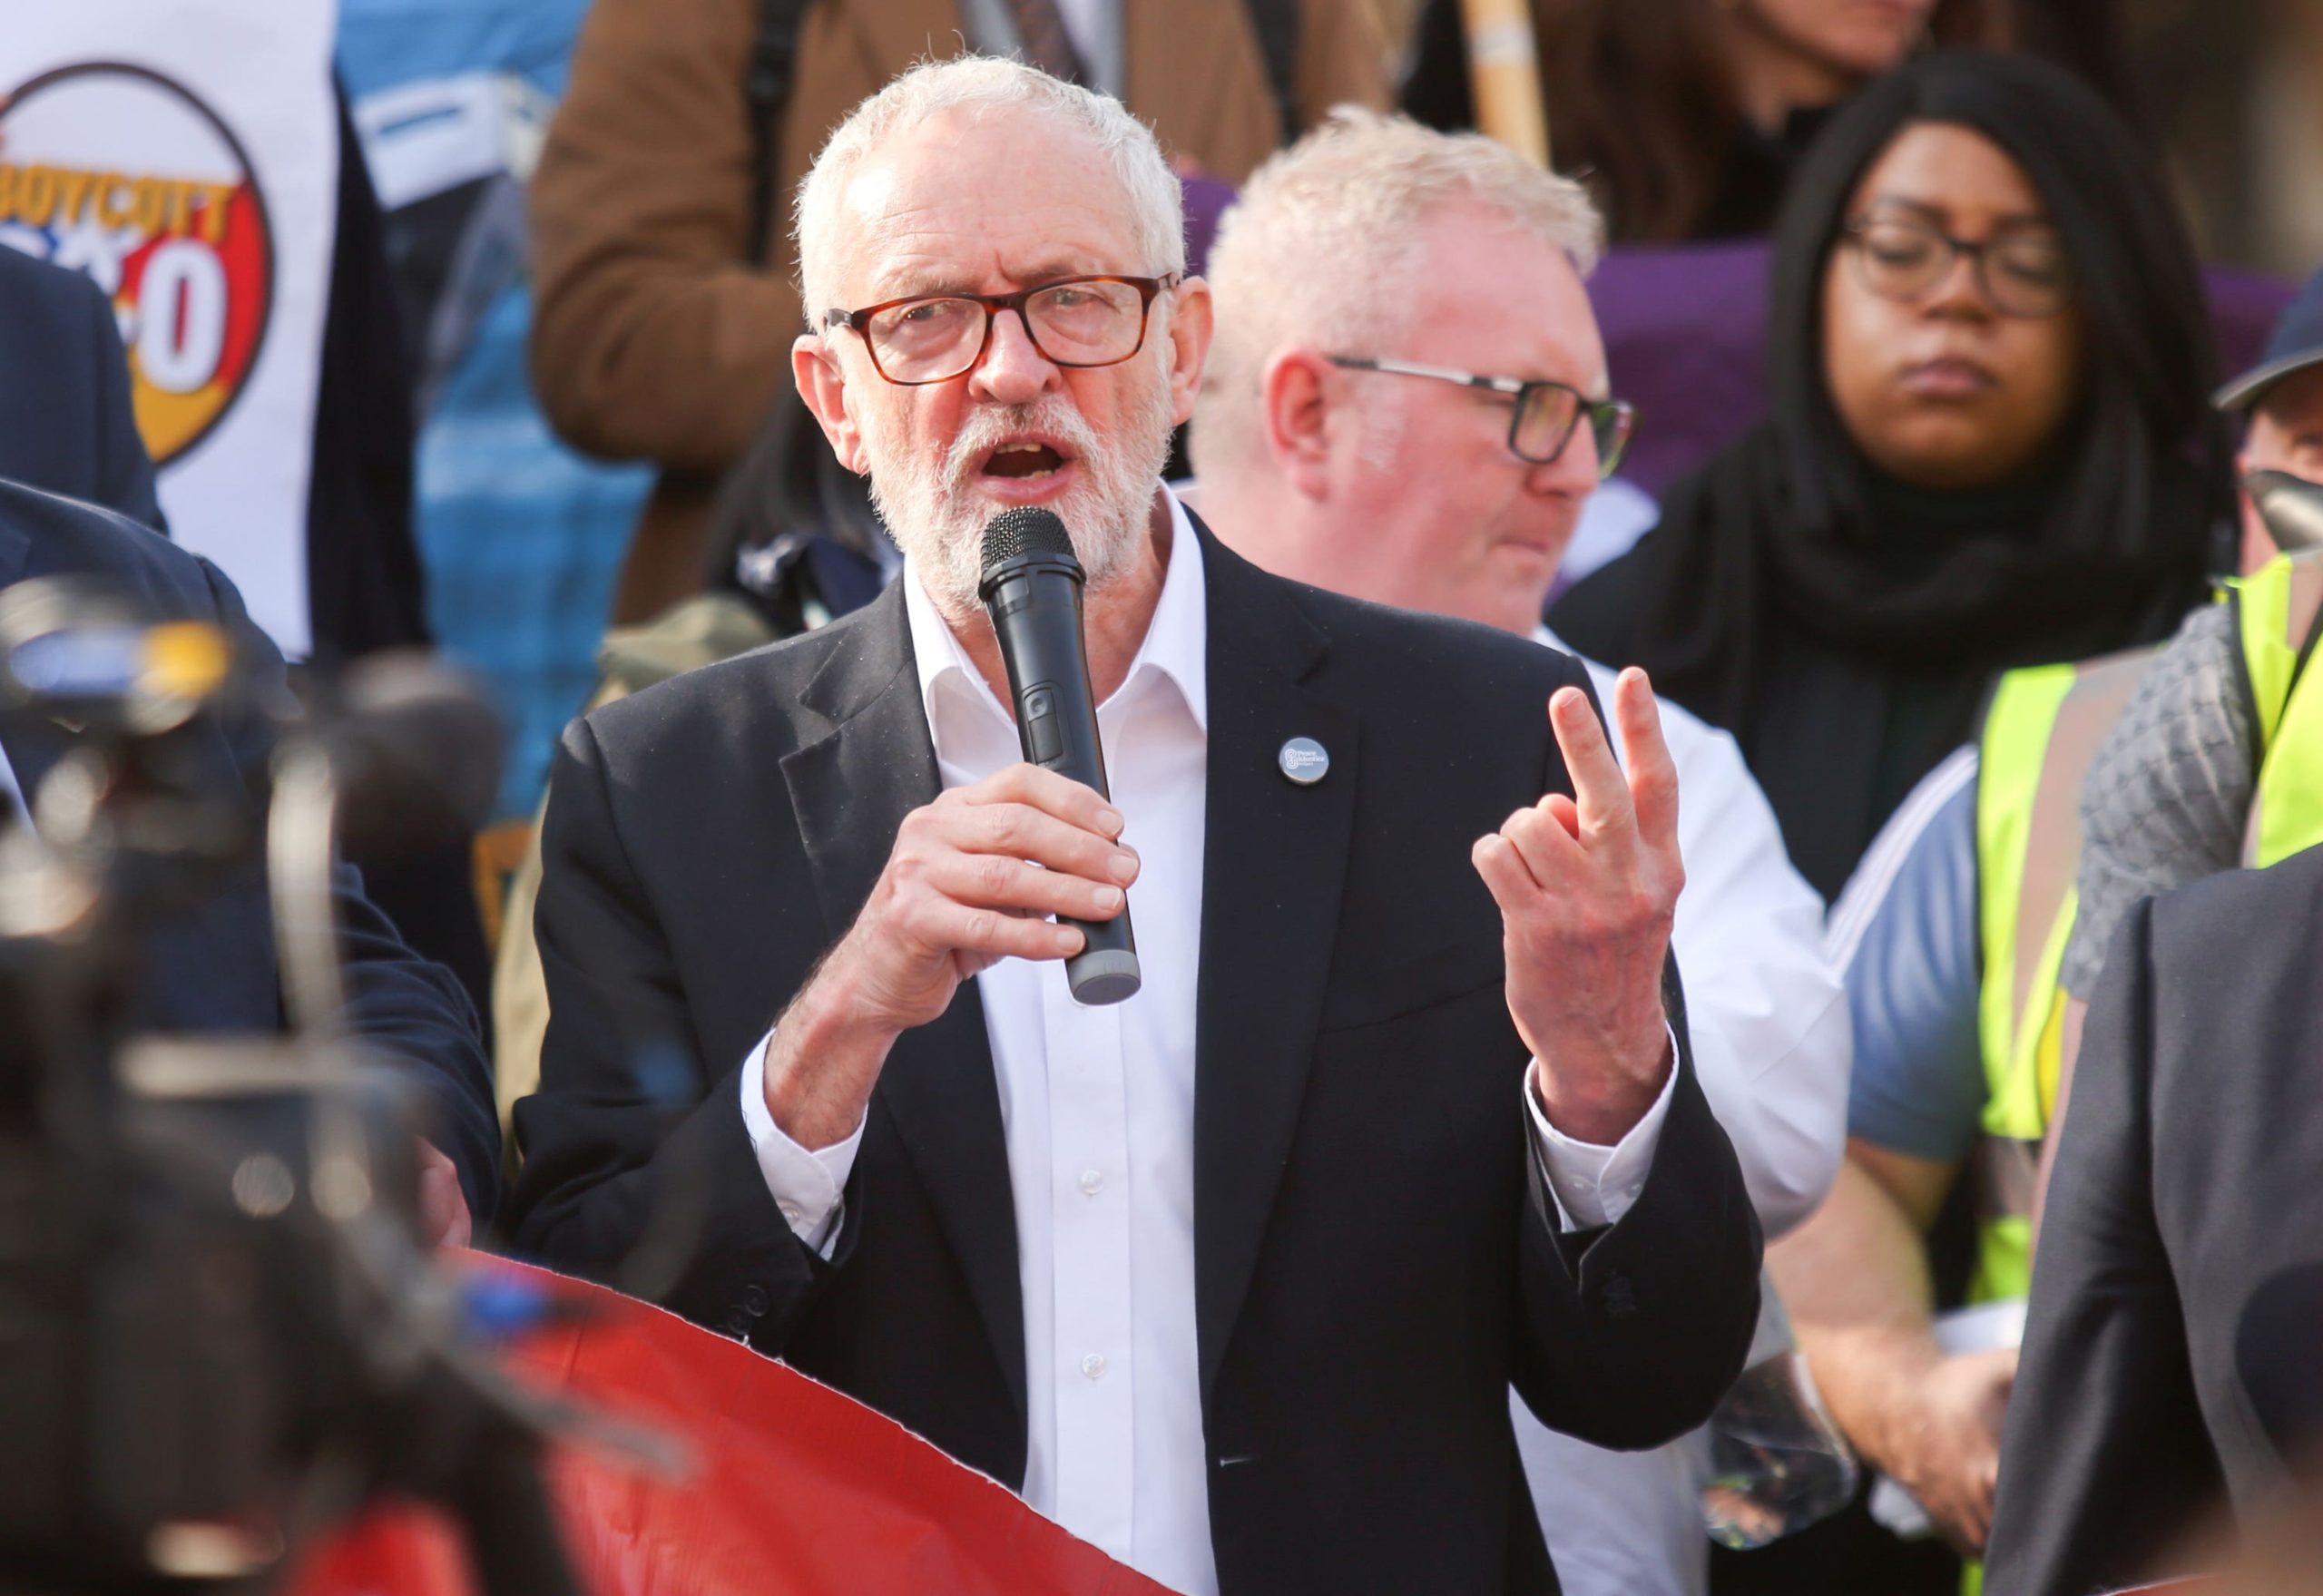 Watch: Corbyn says MI5 and MI6 undermined him as he calls Guardian ‘tool of the British establishment’